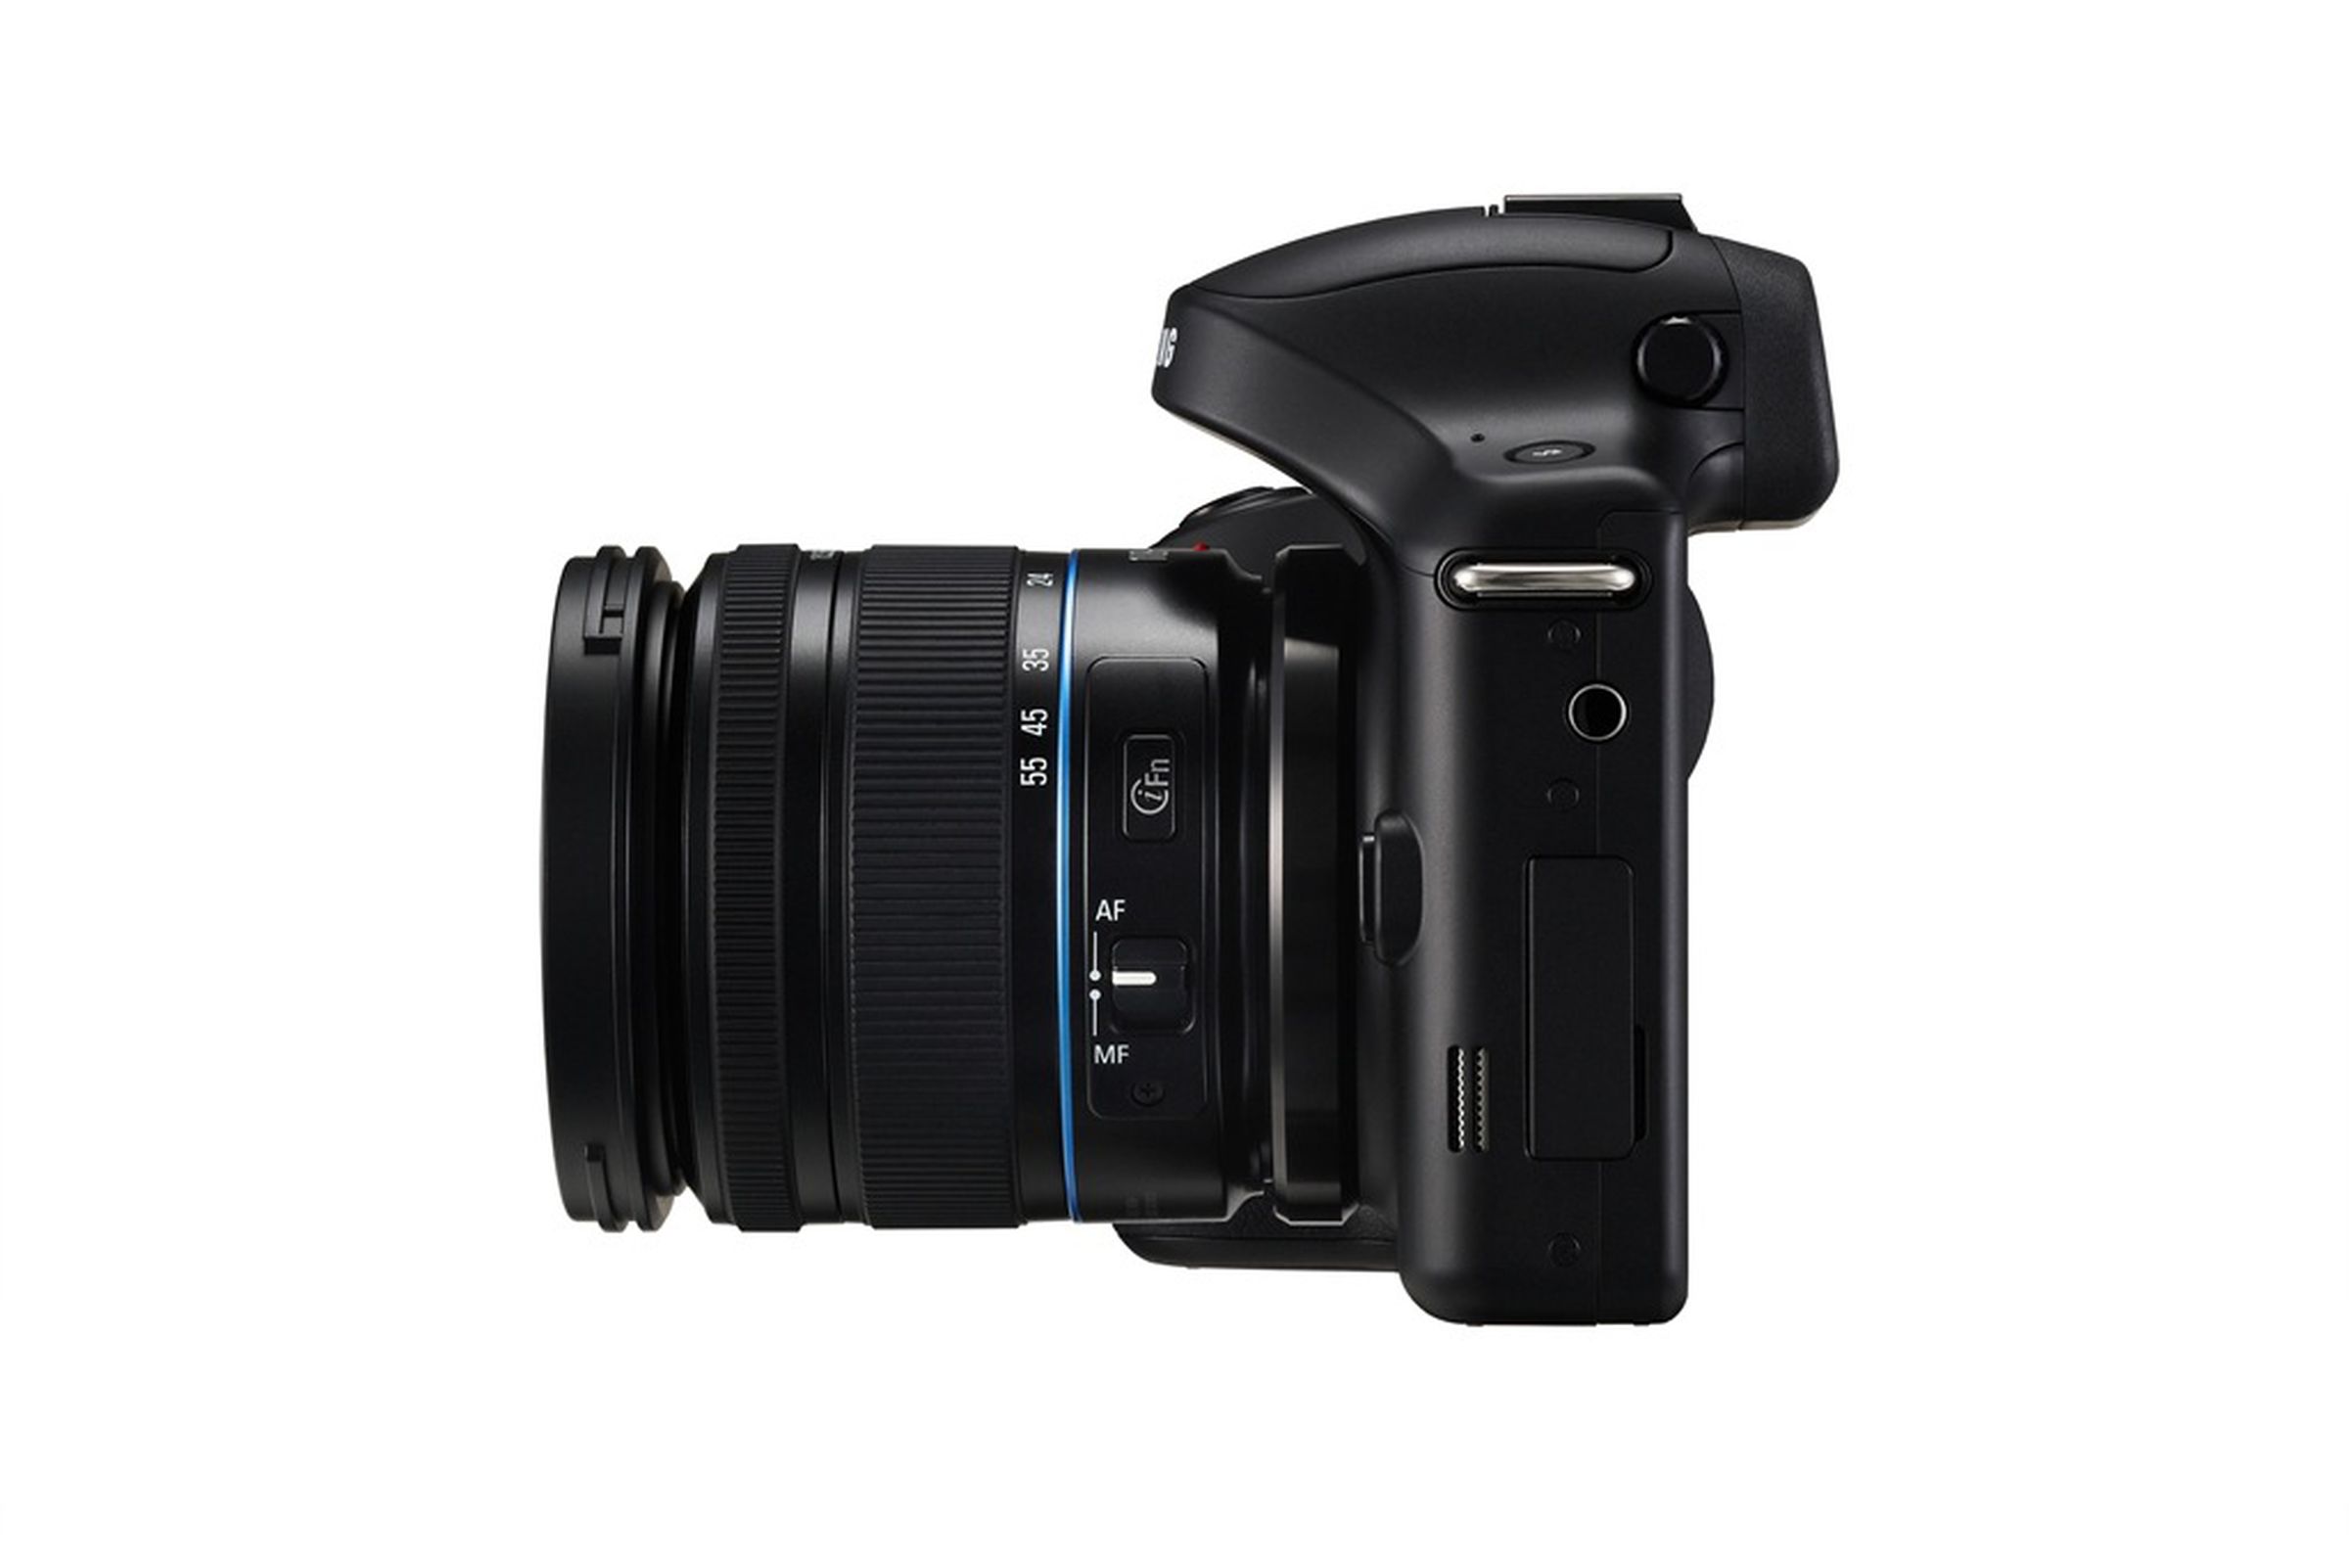 Samsung Galaxy NX pictures